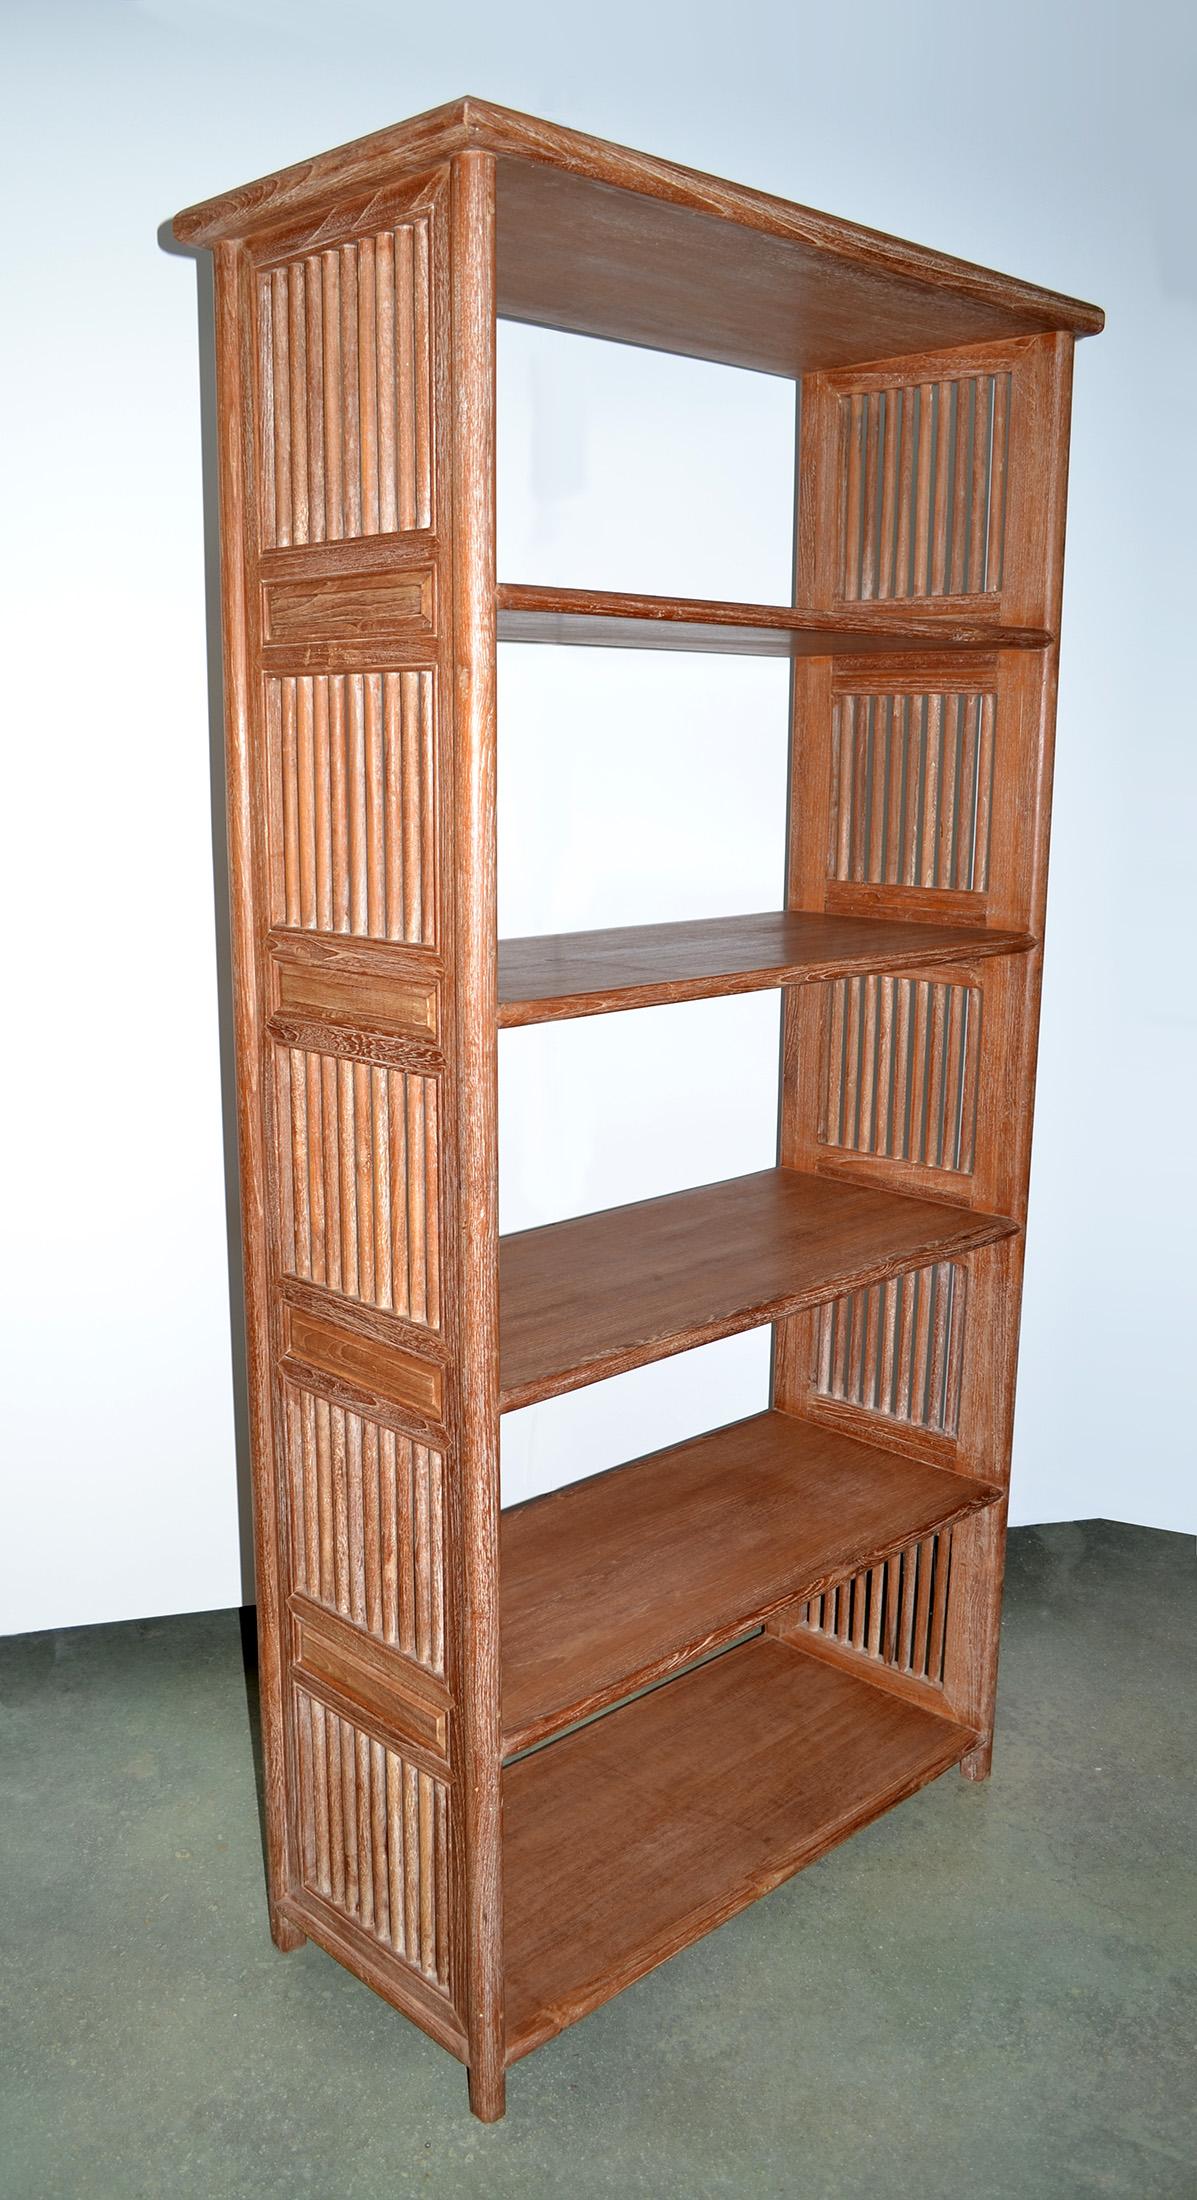 Mid-Century Austrian Style Cerused Oak Bookcase or Etagere, 1950s

A sophisticated, functional mid-century Austrian style open bookcase/etagere crafted from premium cerused oak. Dating back to the 1950s, this piece shows timeless elegance and